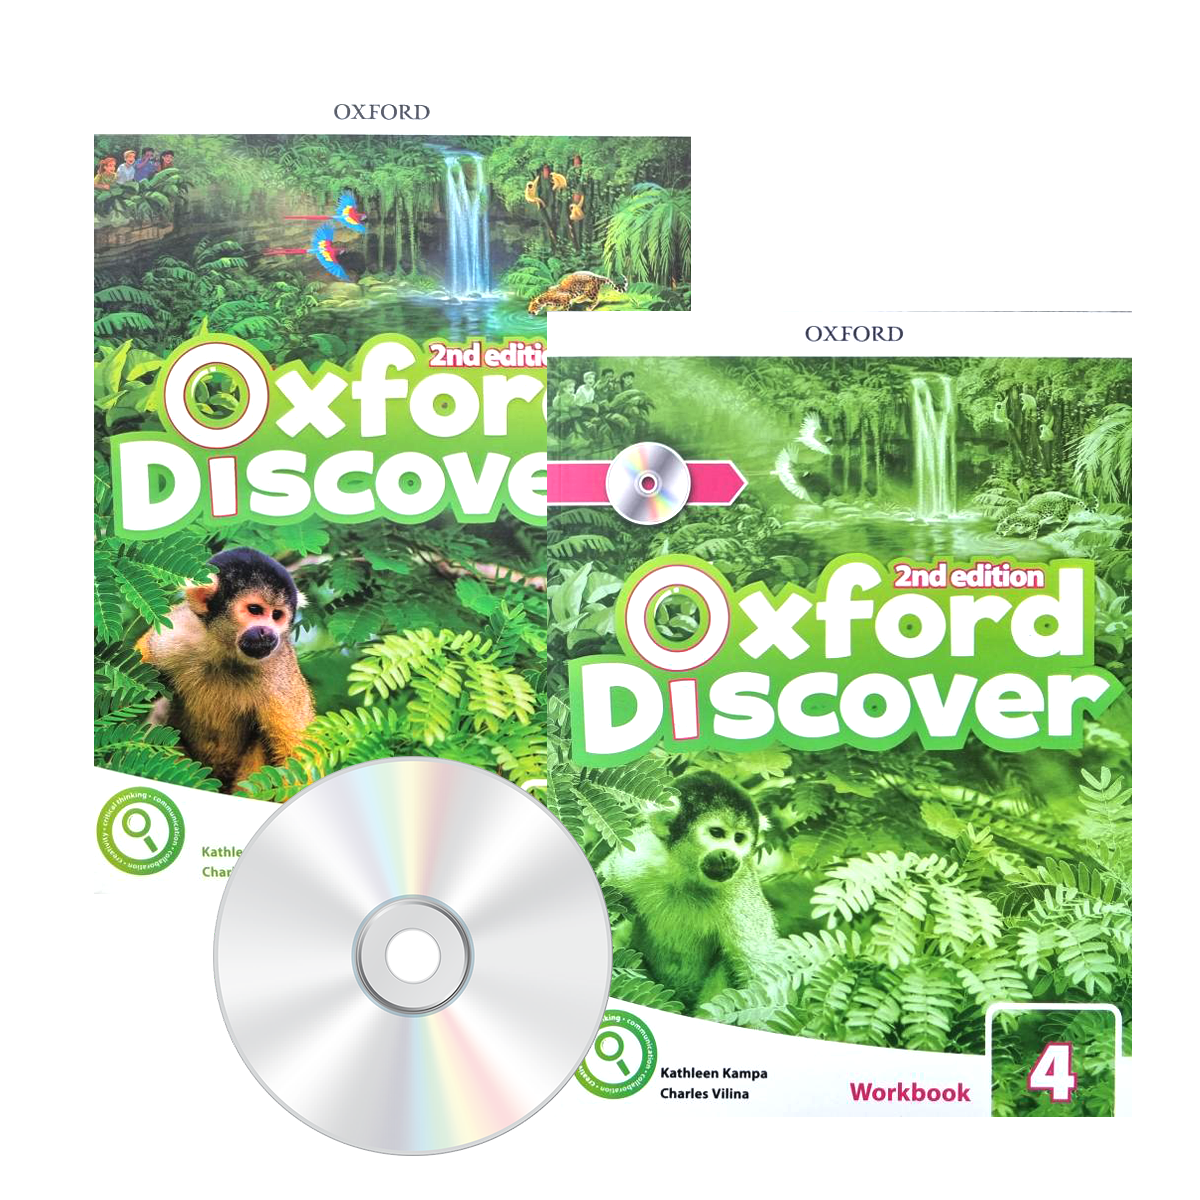 Oxford discover 4. Oxford Discovery 4. Oxford discover 4 2nd Edition. Ответы на Oxford discover 1.